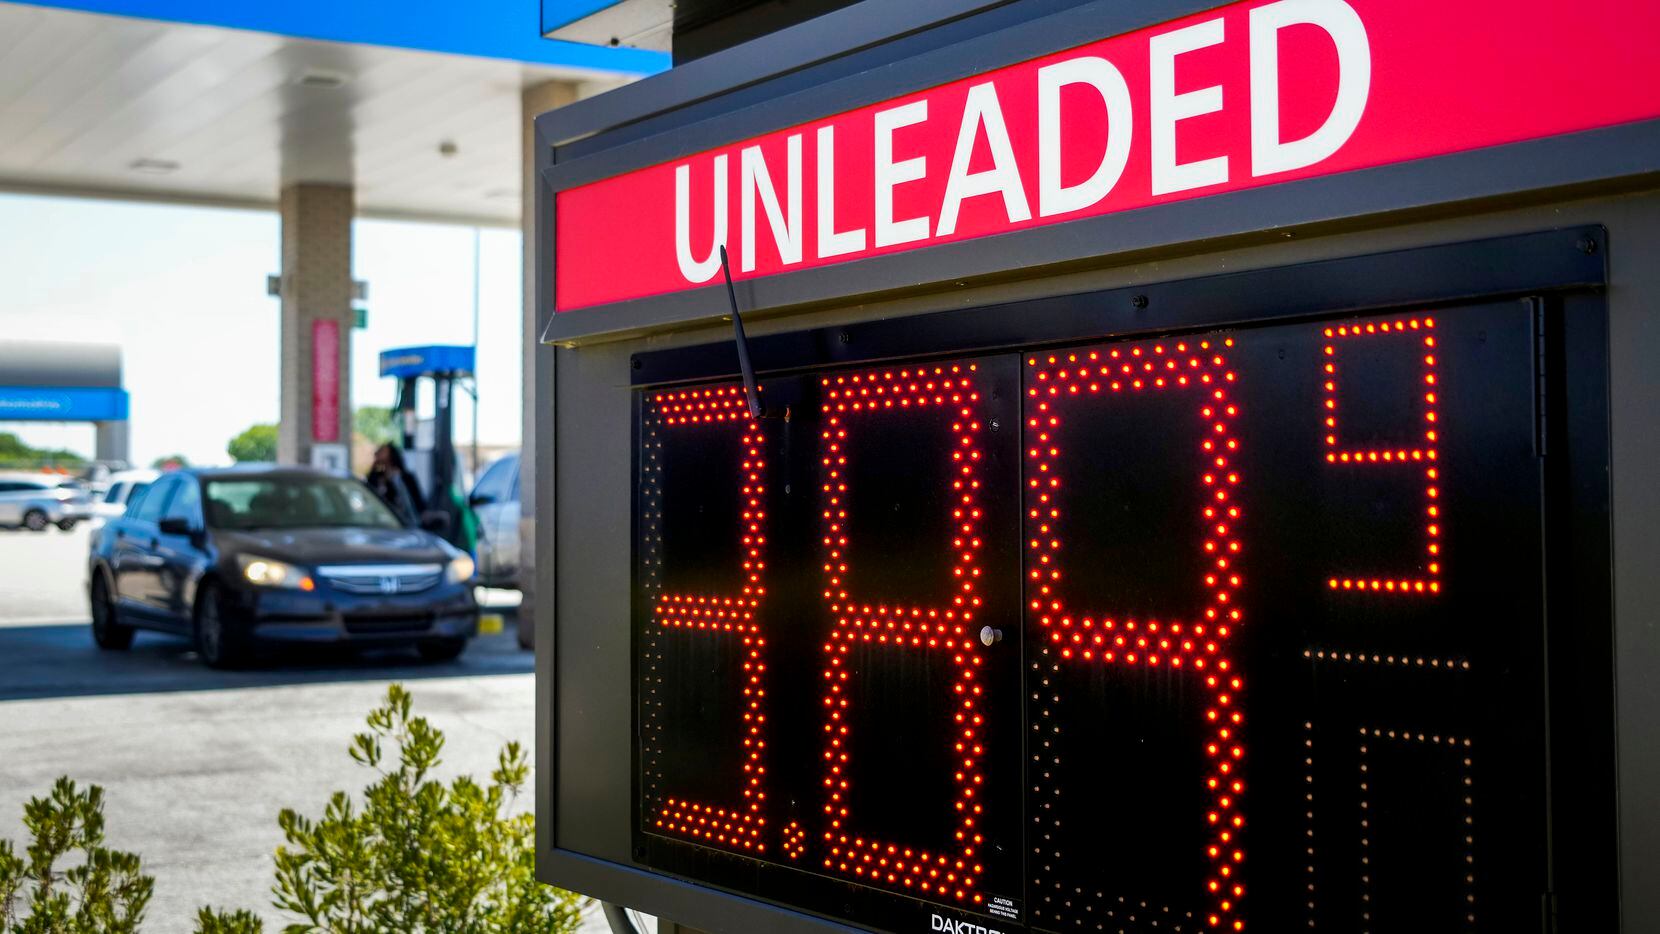 A sign advertises a price of $3.89.9 for unleaded gasoline at a Walmart in the 4800 block of...